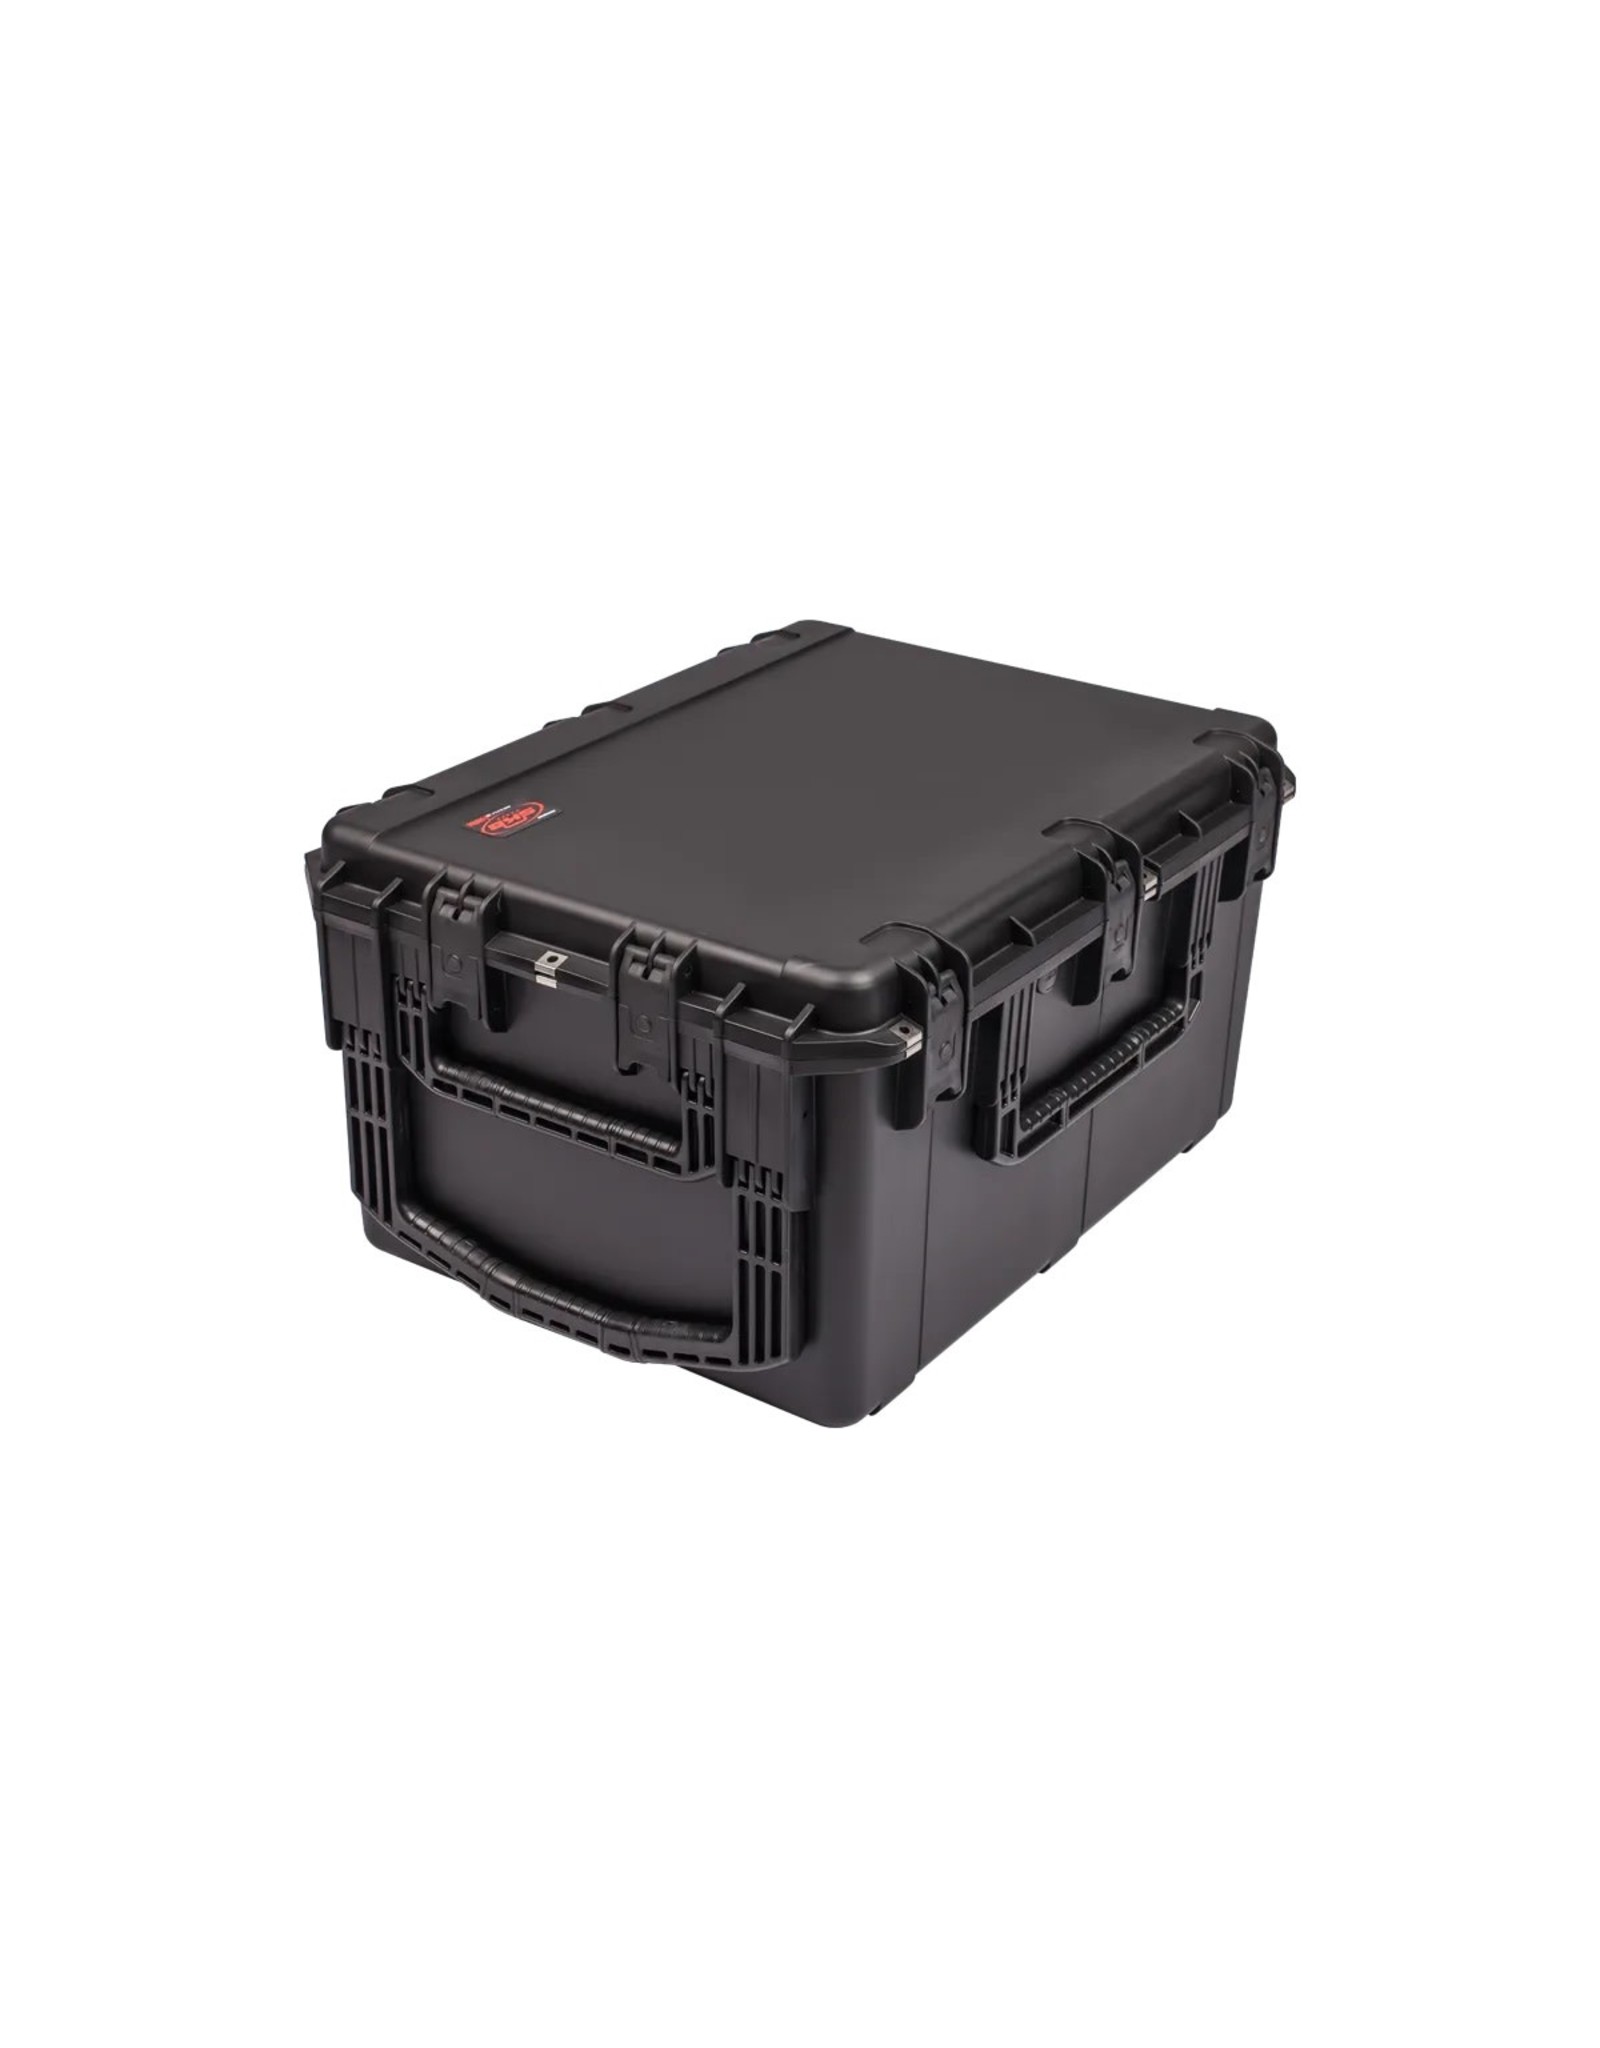 SKB SKB 3i Series 3i-2922-16B-C Waterproof Case with Wheels and Cubed Foam